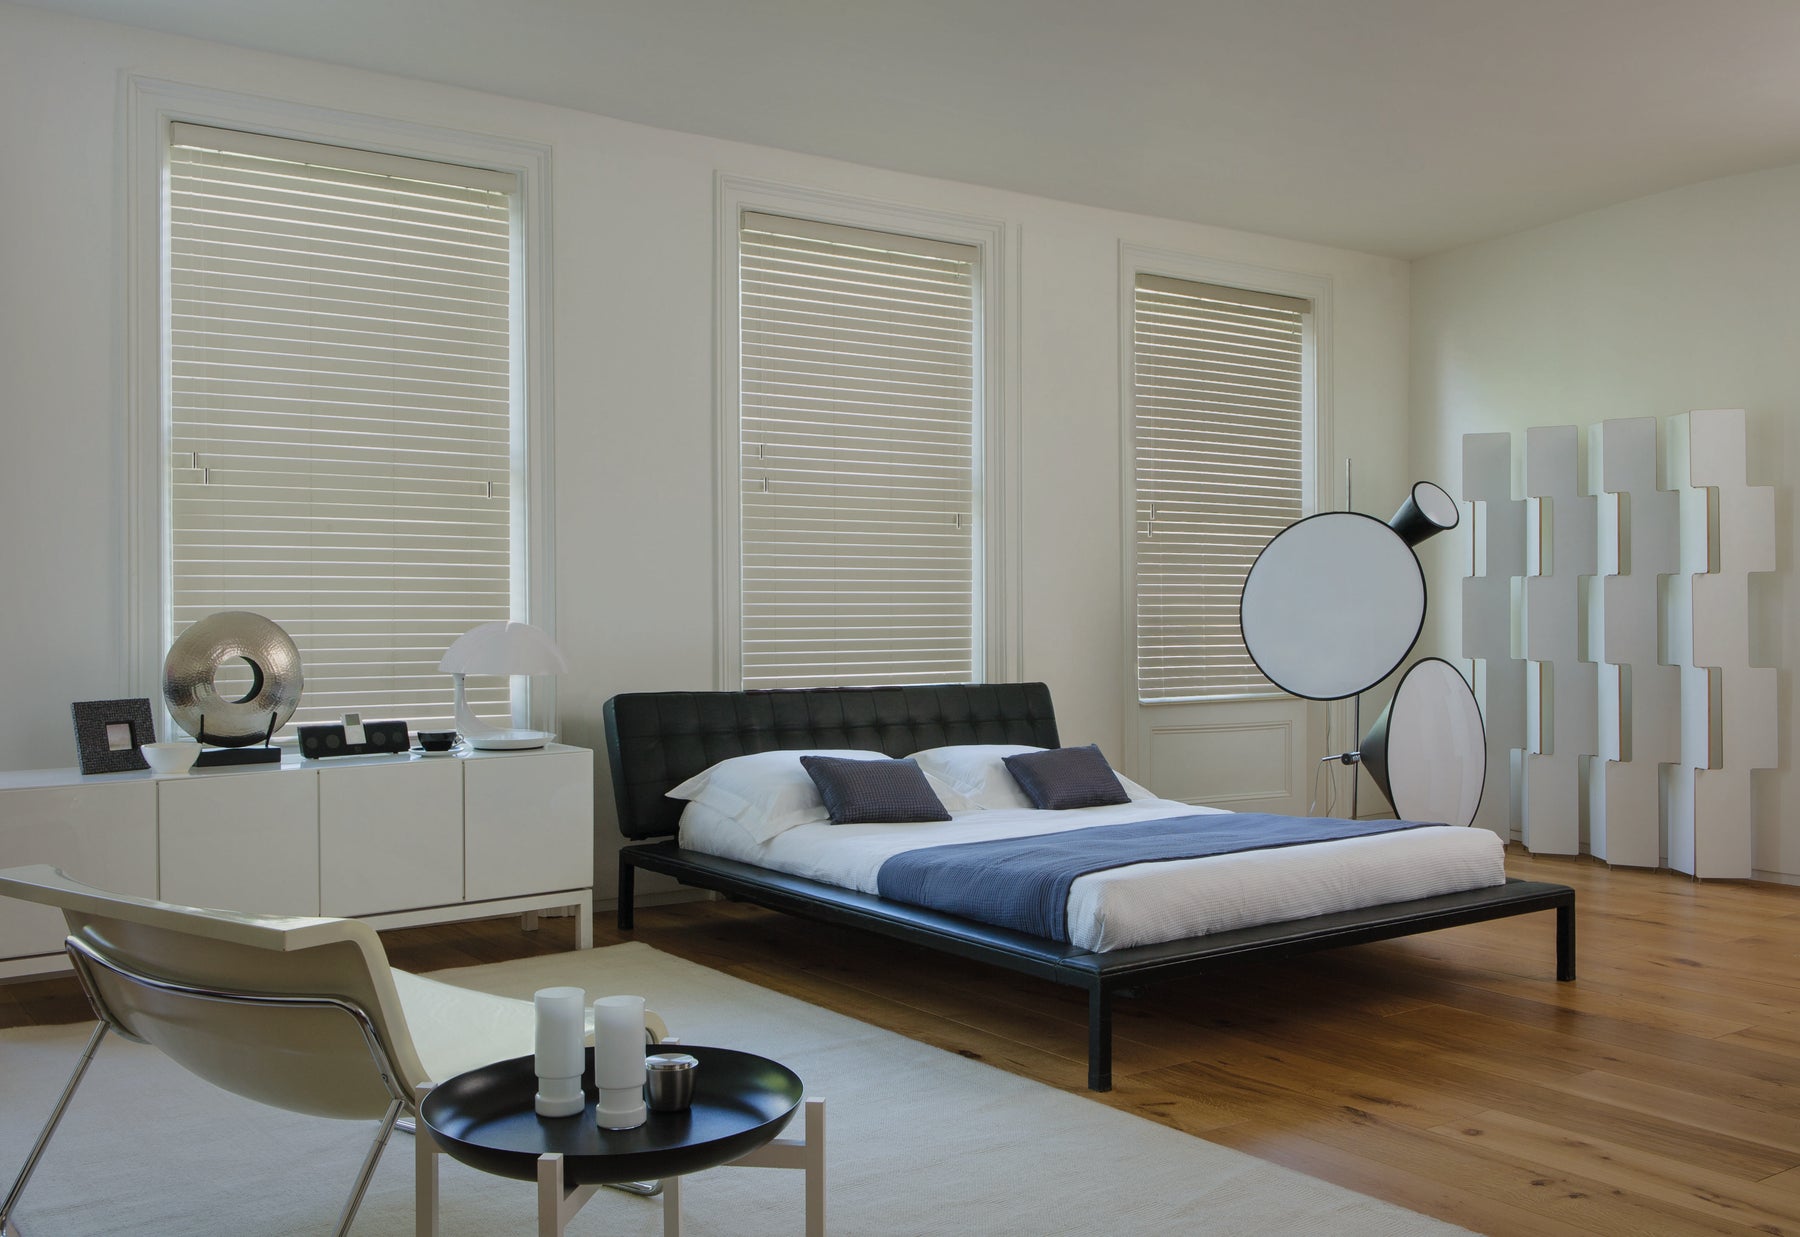 Which Blind is Best for Privacy and Light Control?